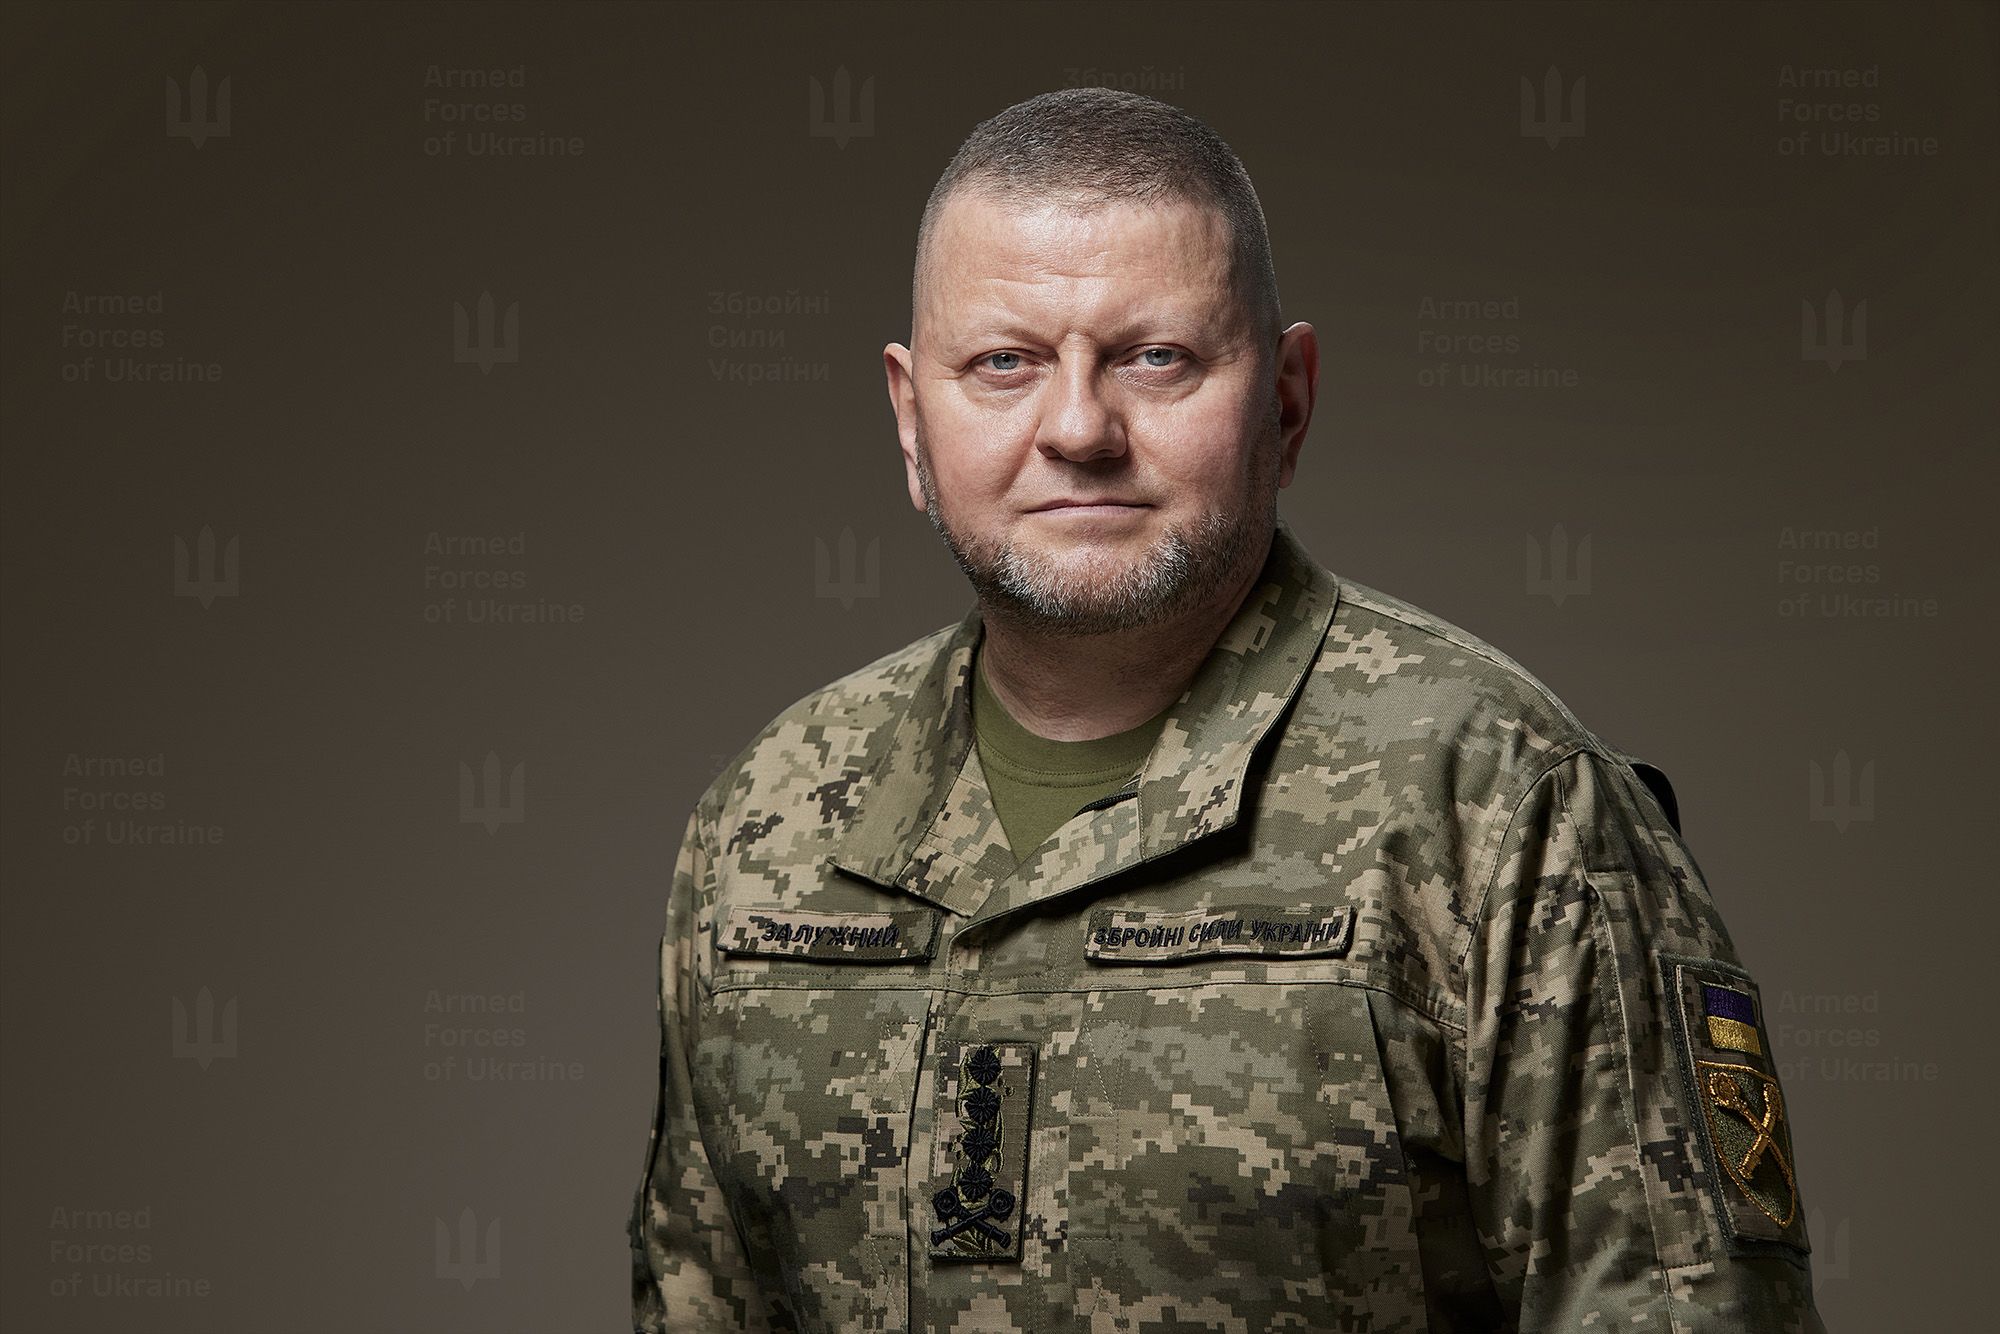 Ukraine's army chief: The design of war has changed